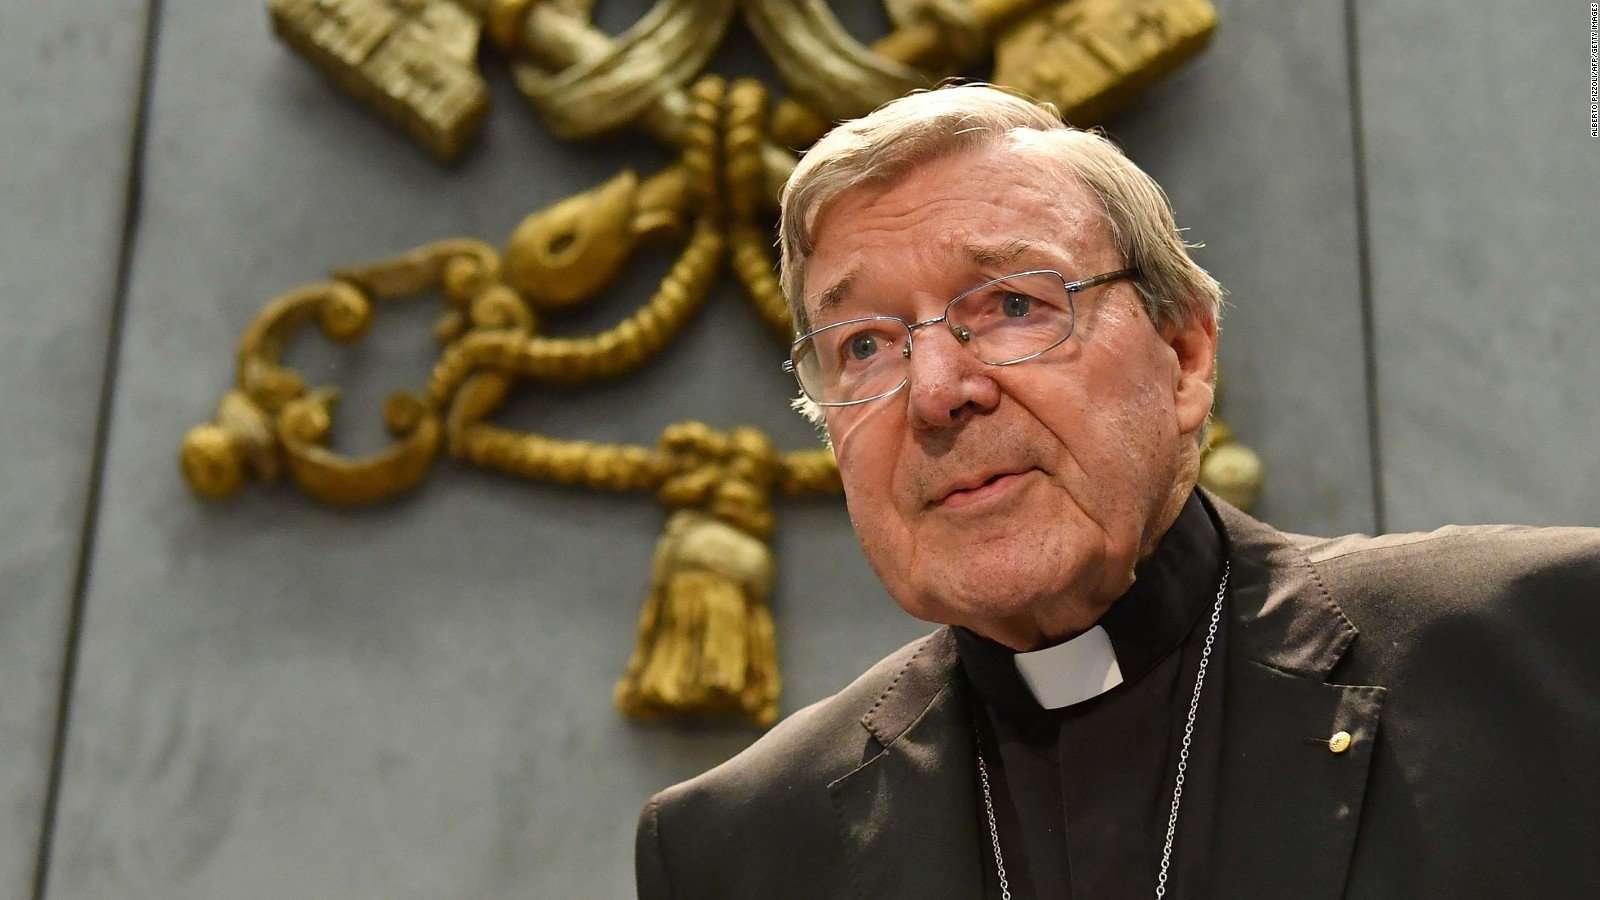 image for Vatican’s Third-Most Powerful Official Cardinal George Pell Convicted on All Charges He Sexually Abused Choir Boys in the 1990s